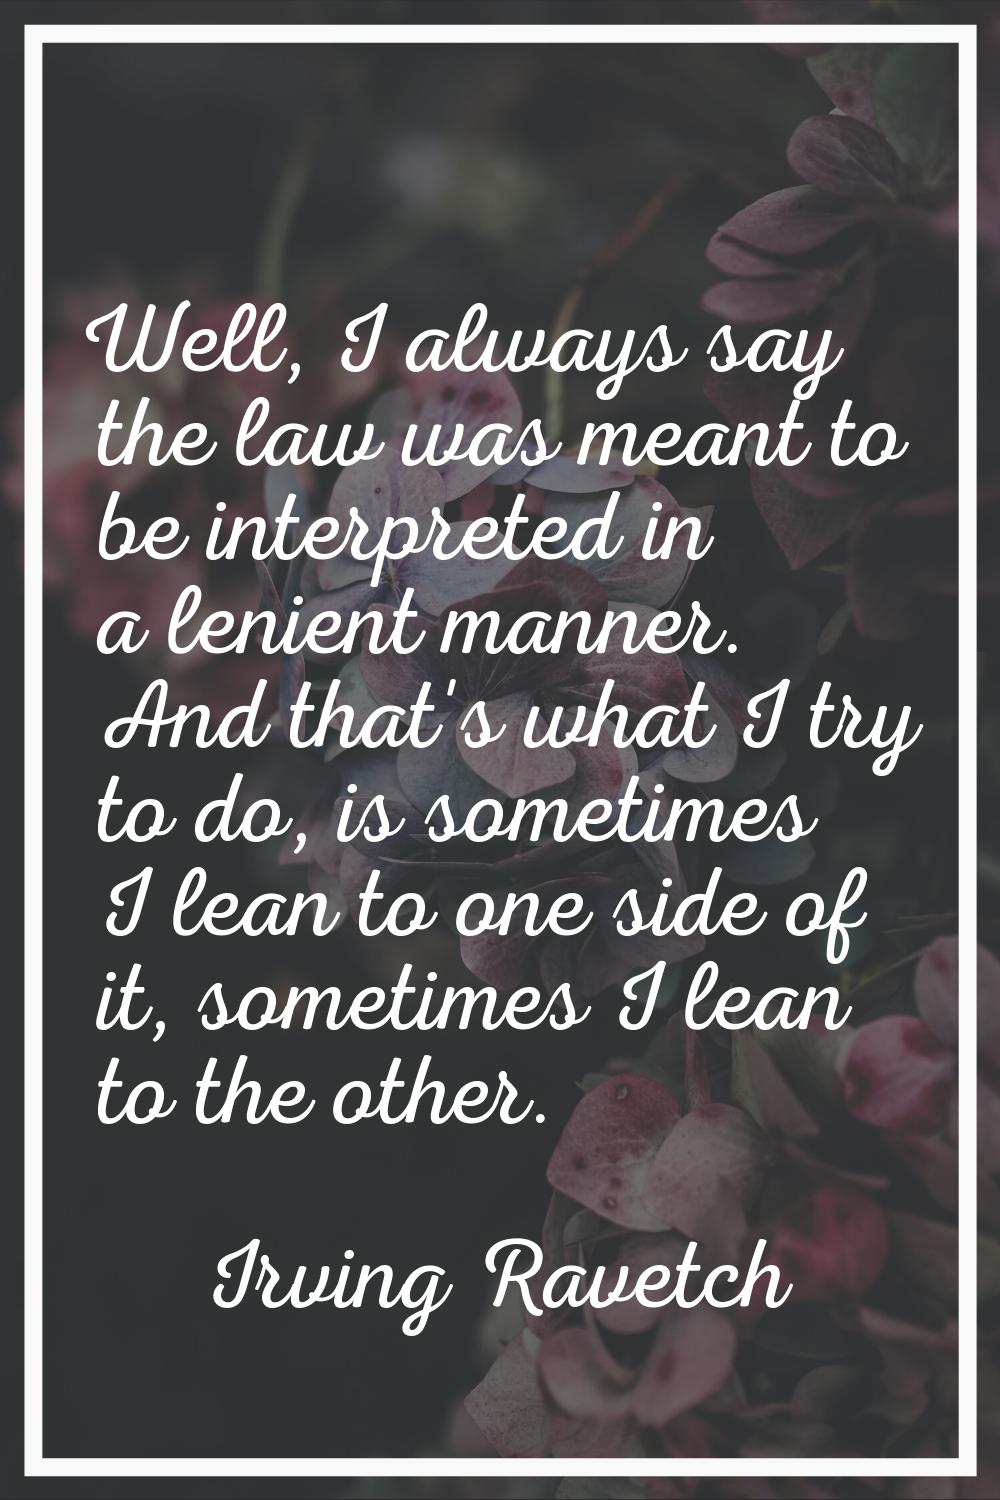 Well, I always say the law was meant to be interpreted in a lenient manner. And that's what I try t